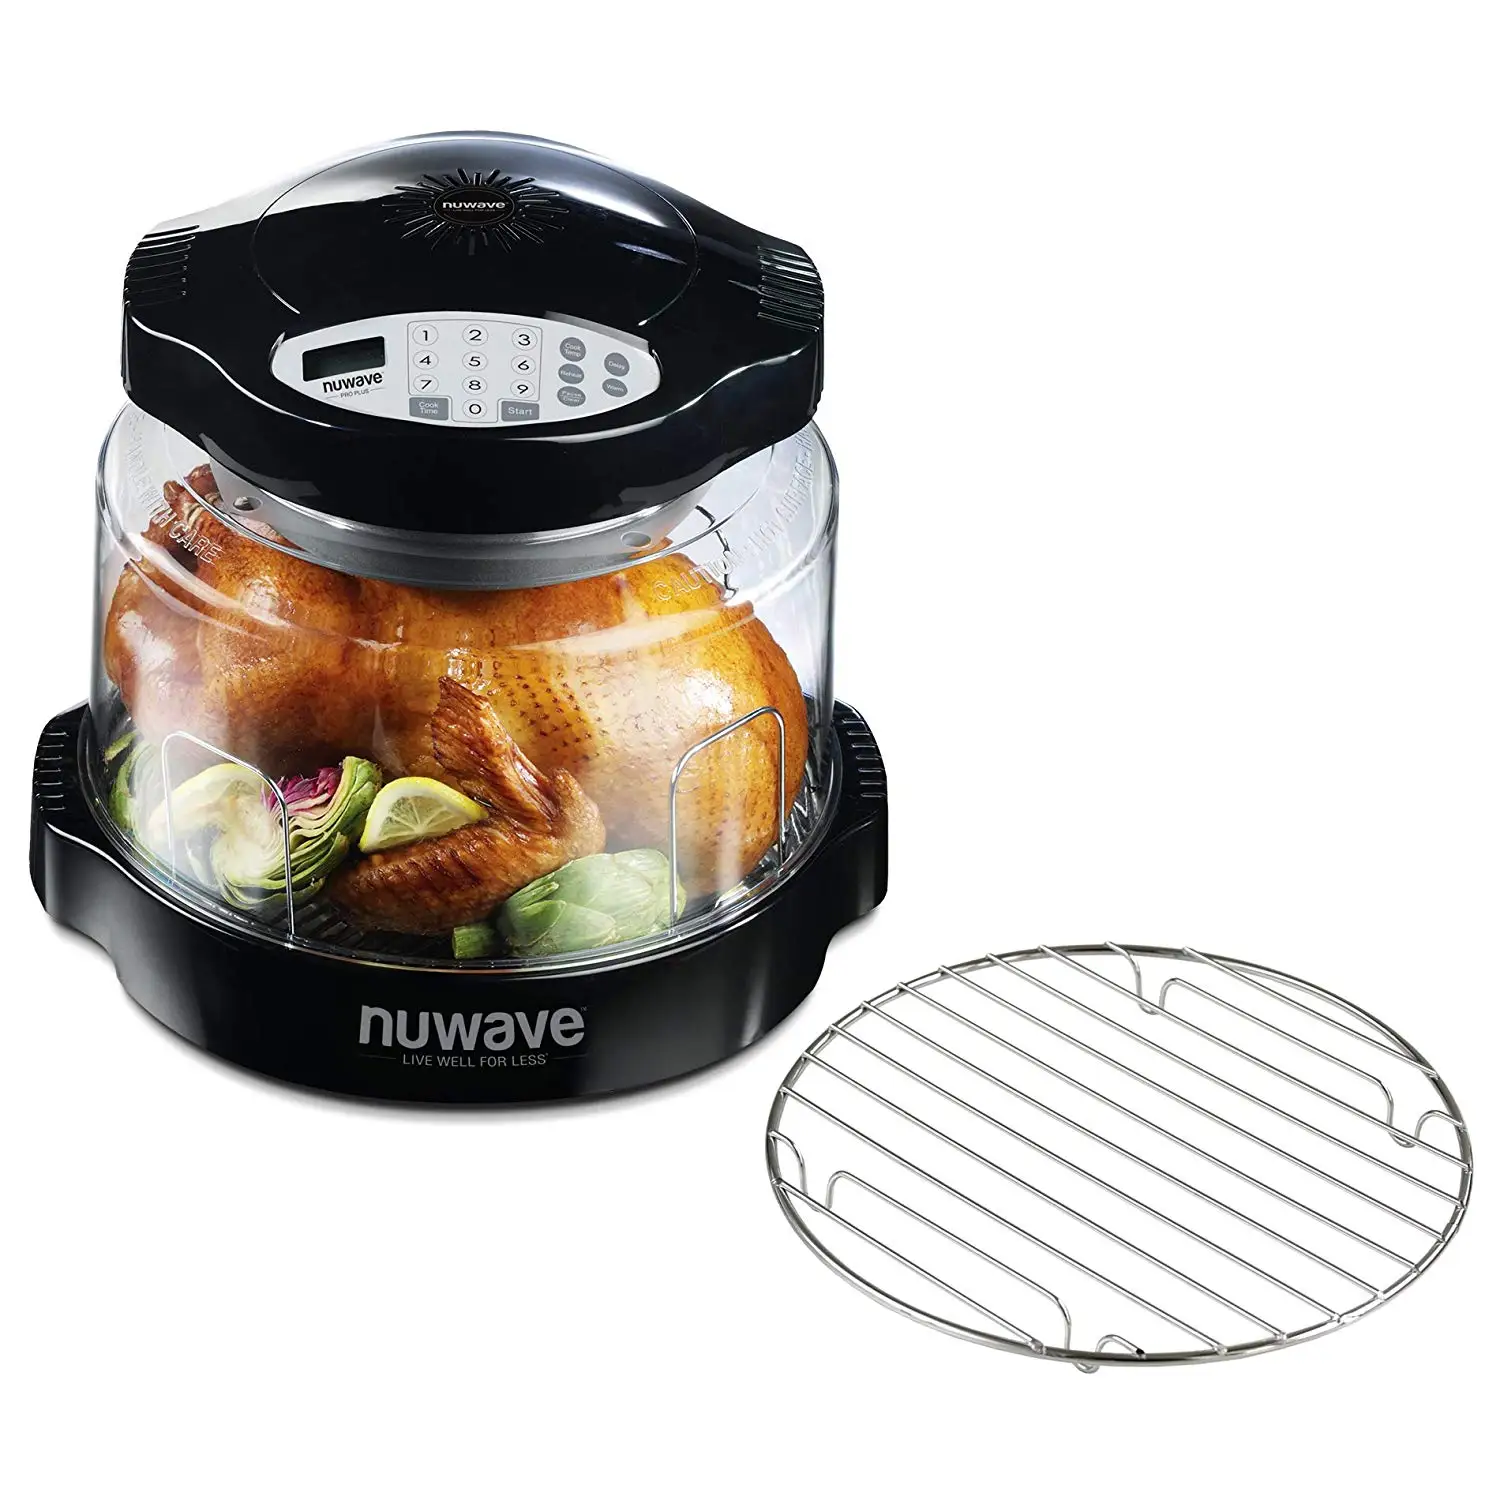 139.97. NuWave Oven Pro Plus with Black Digital Panel and Additional 9.25 I...